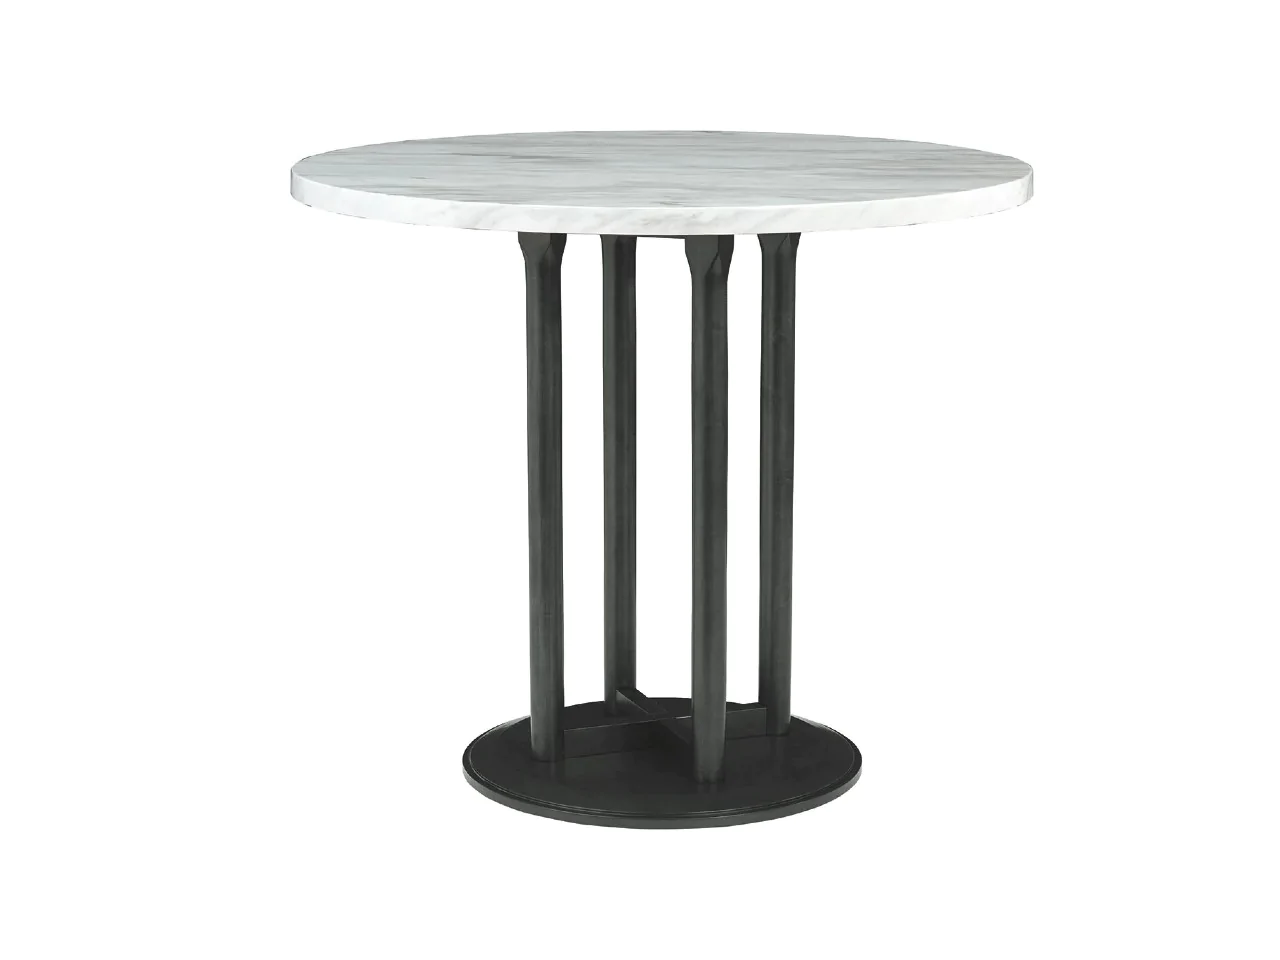 Dining room tables in Calgary